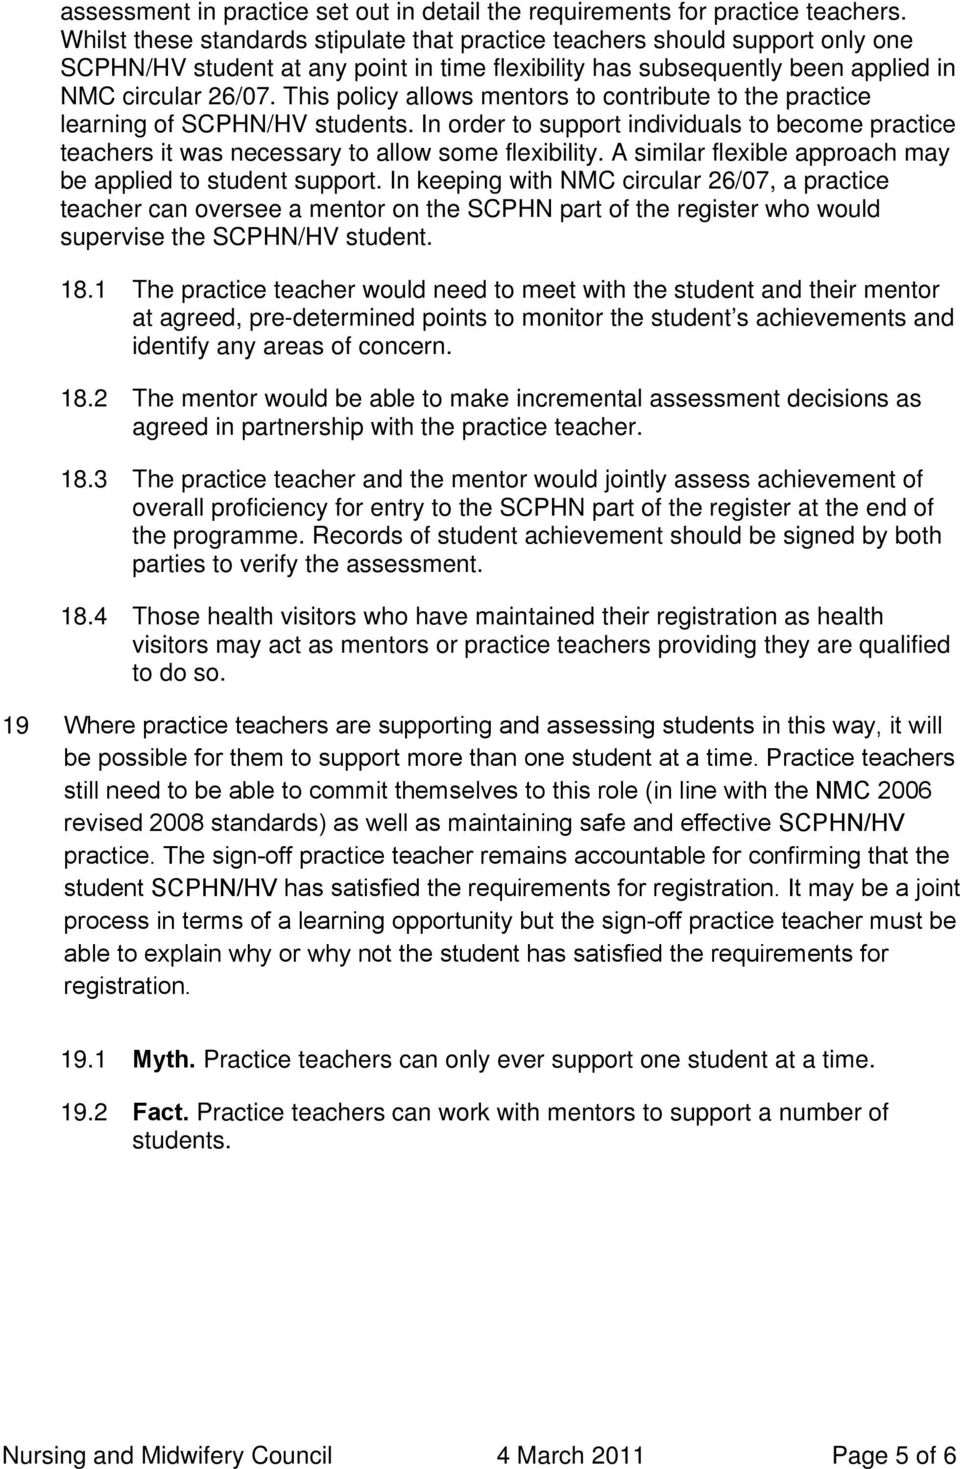 This policy allows mentors to contribute to the practice learning of SCPHN/HV students. In order to support individuals to become practice teachers it was necessary to allow some flexibility.